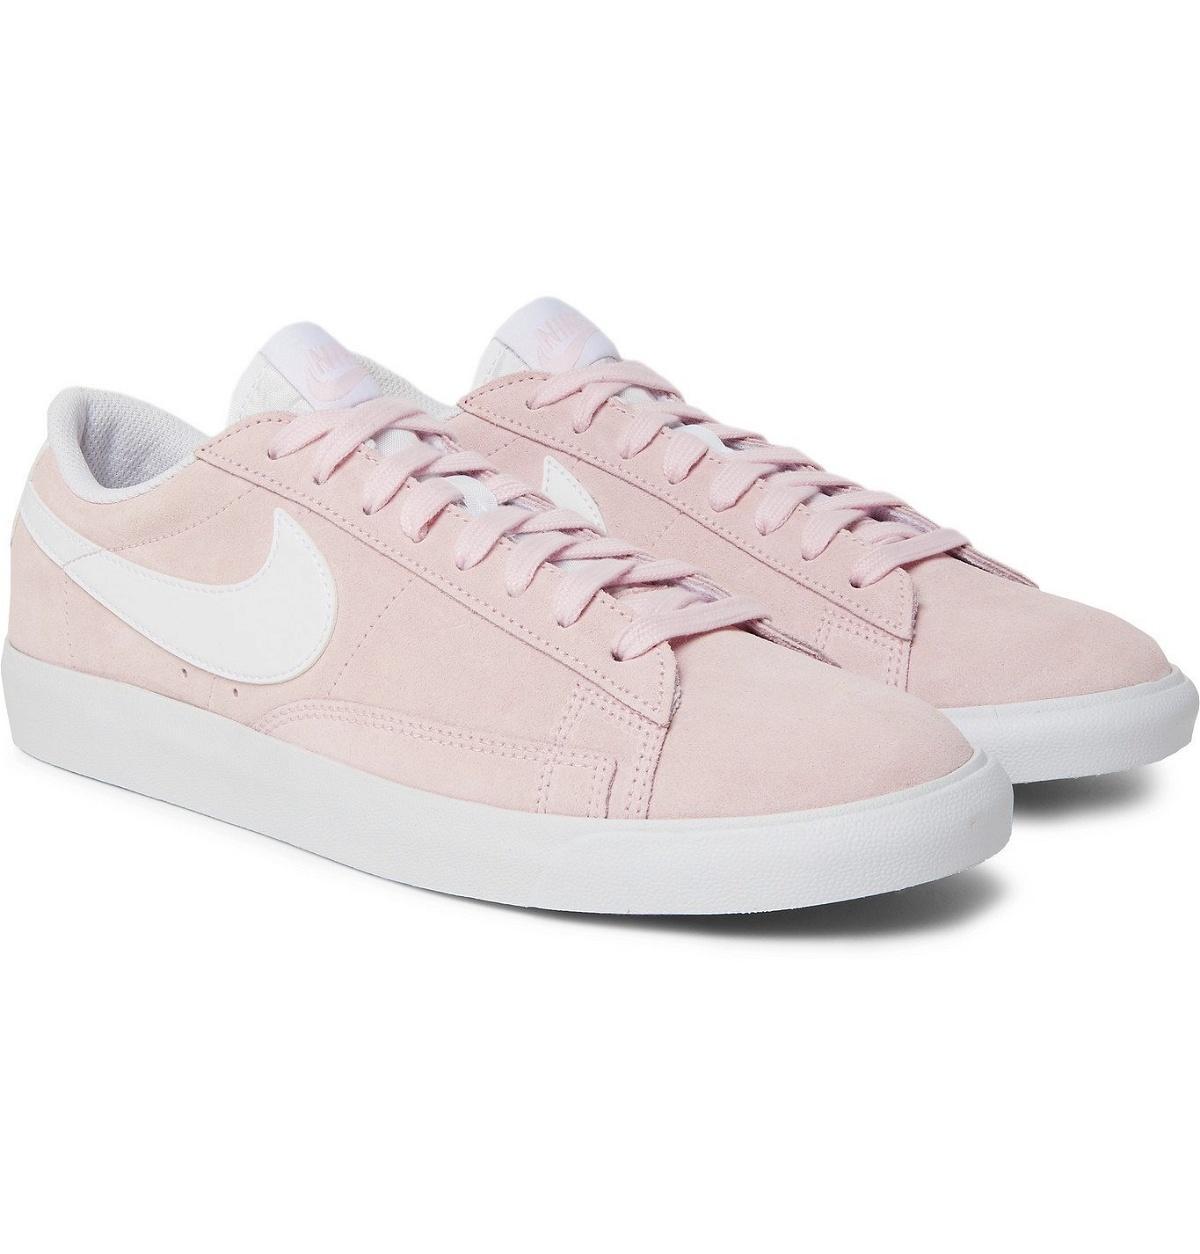 Slepen mosterd Mew Mew NIKE - Blazer Low Leather-Trimmed Suede Sneakers - Pink Nike